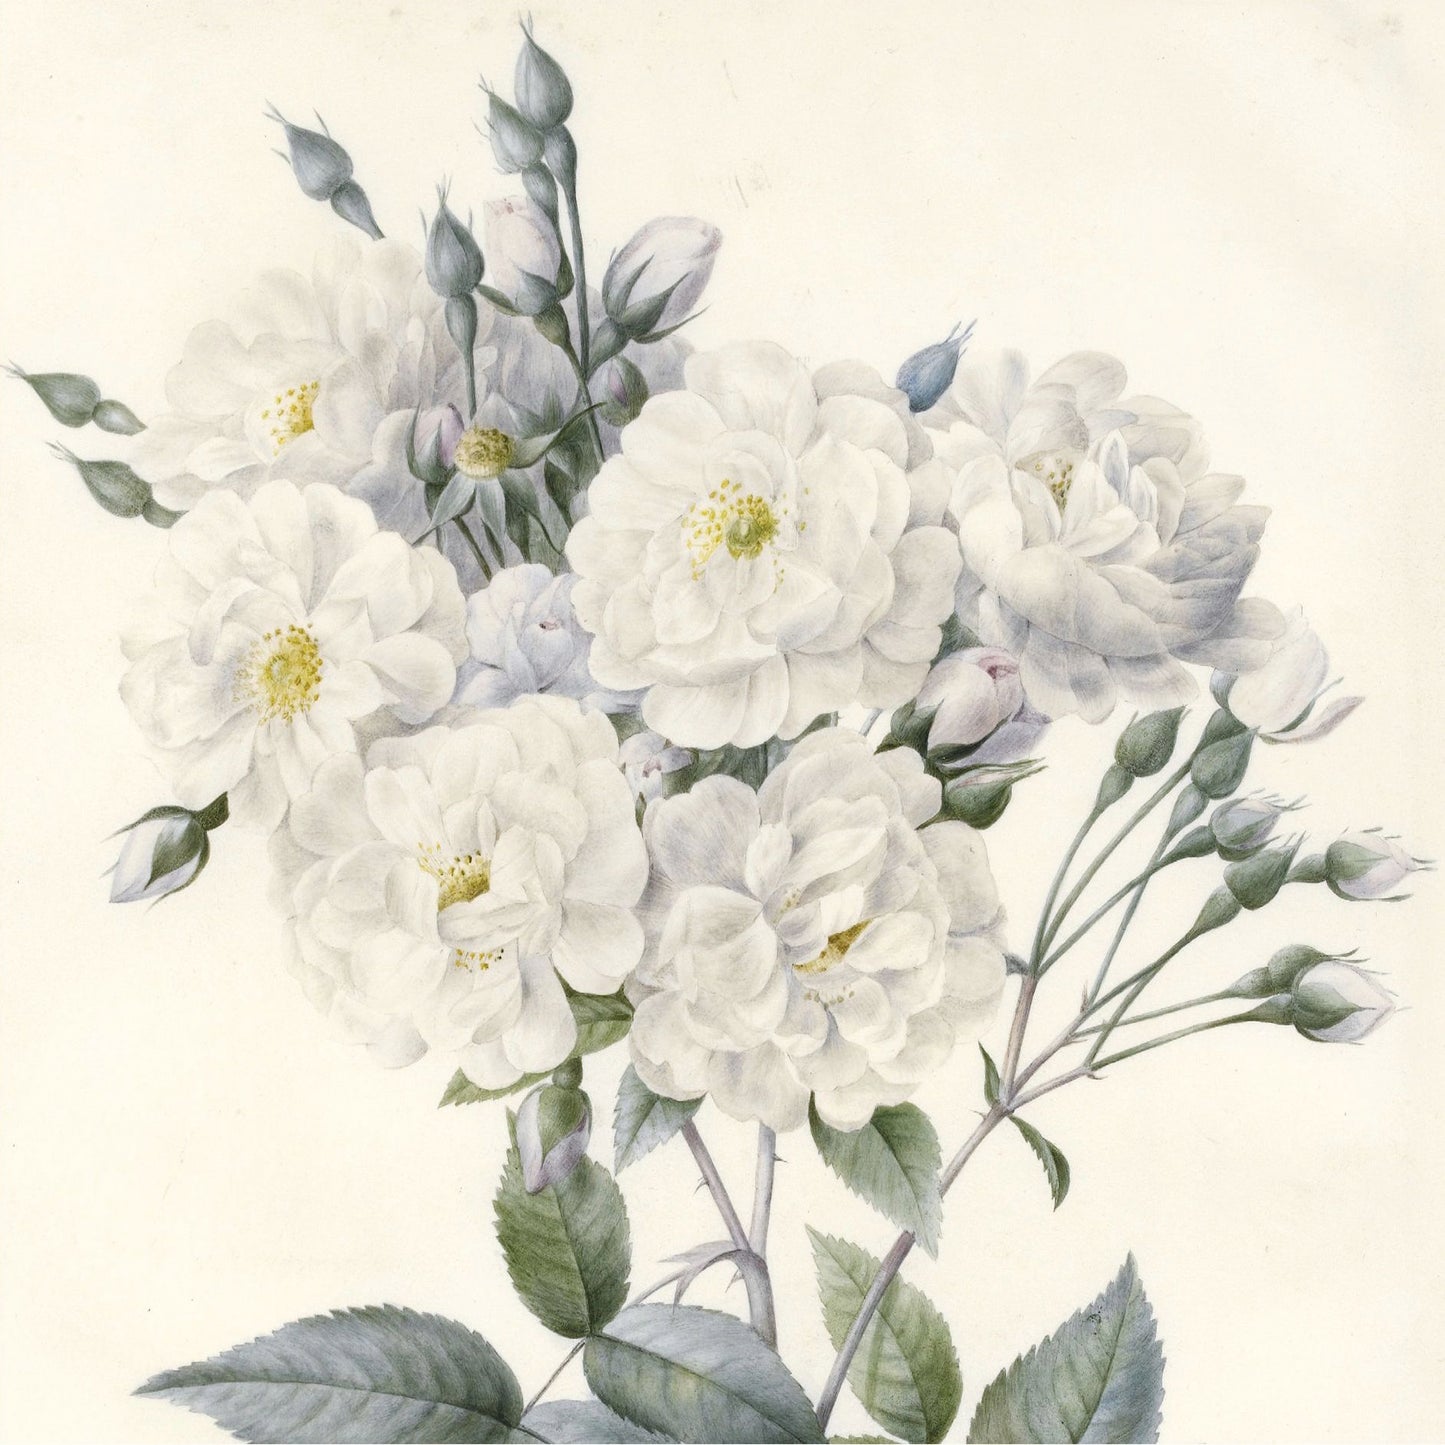 Square greeting card - botanical watercolour illustration of a bunch of white, many petalled noisette roses with yellow centres. Against an off-white background. From the Broughton Collection of The Fitzwilliam Museum, brought to you by CuratingCambridge.com